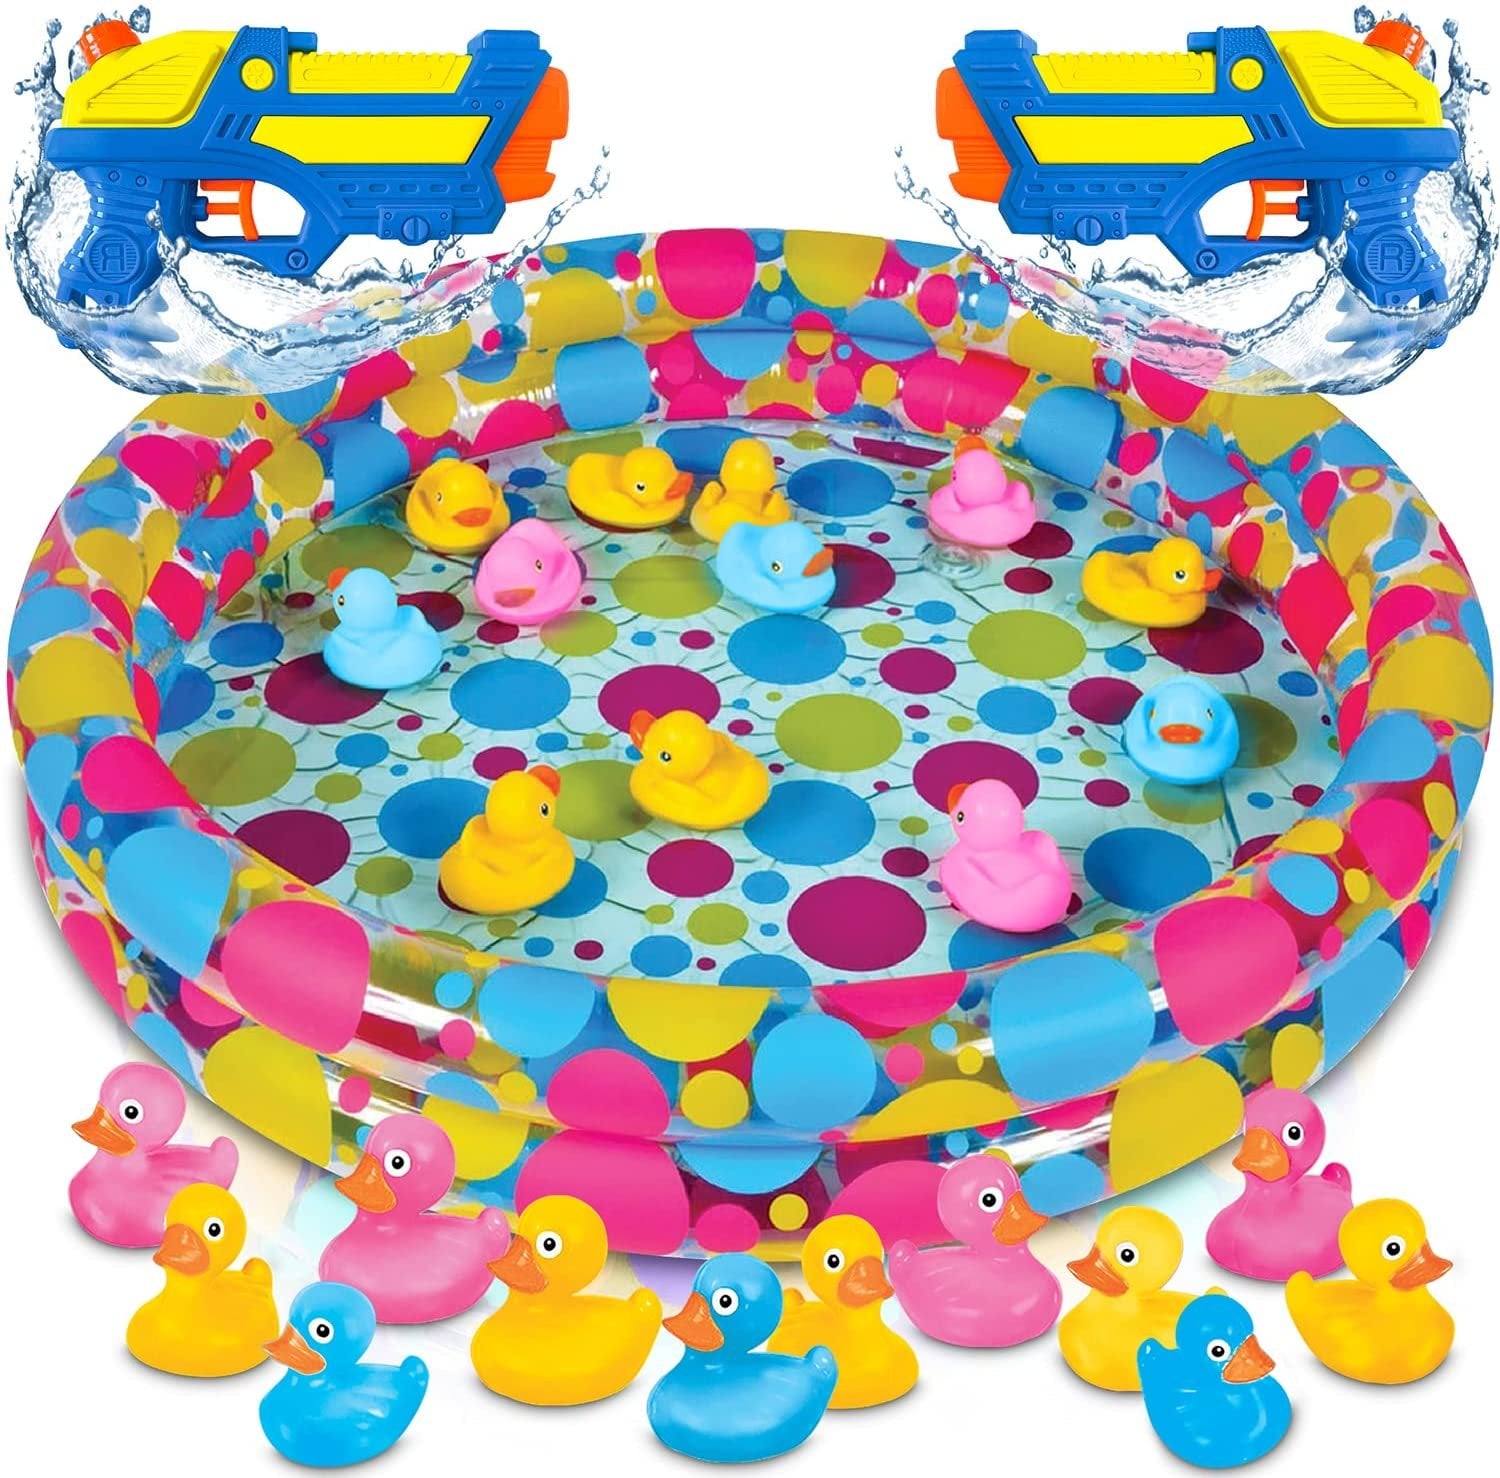 Gamie Duckem Down Shooting Game, Carnival Duck Pond Game with 1 Infla